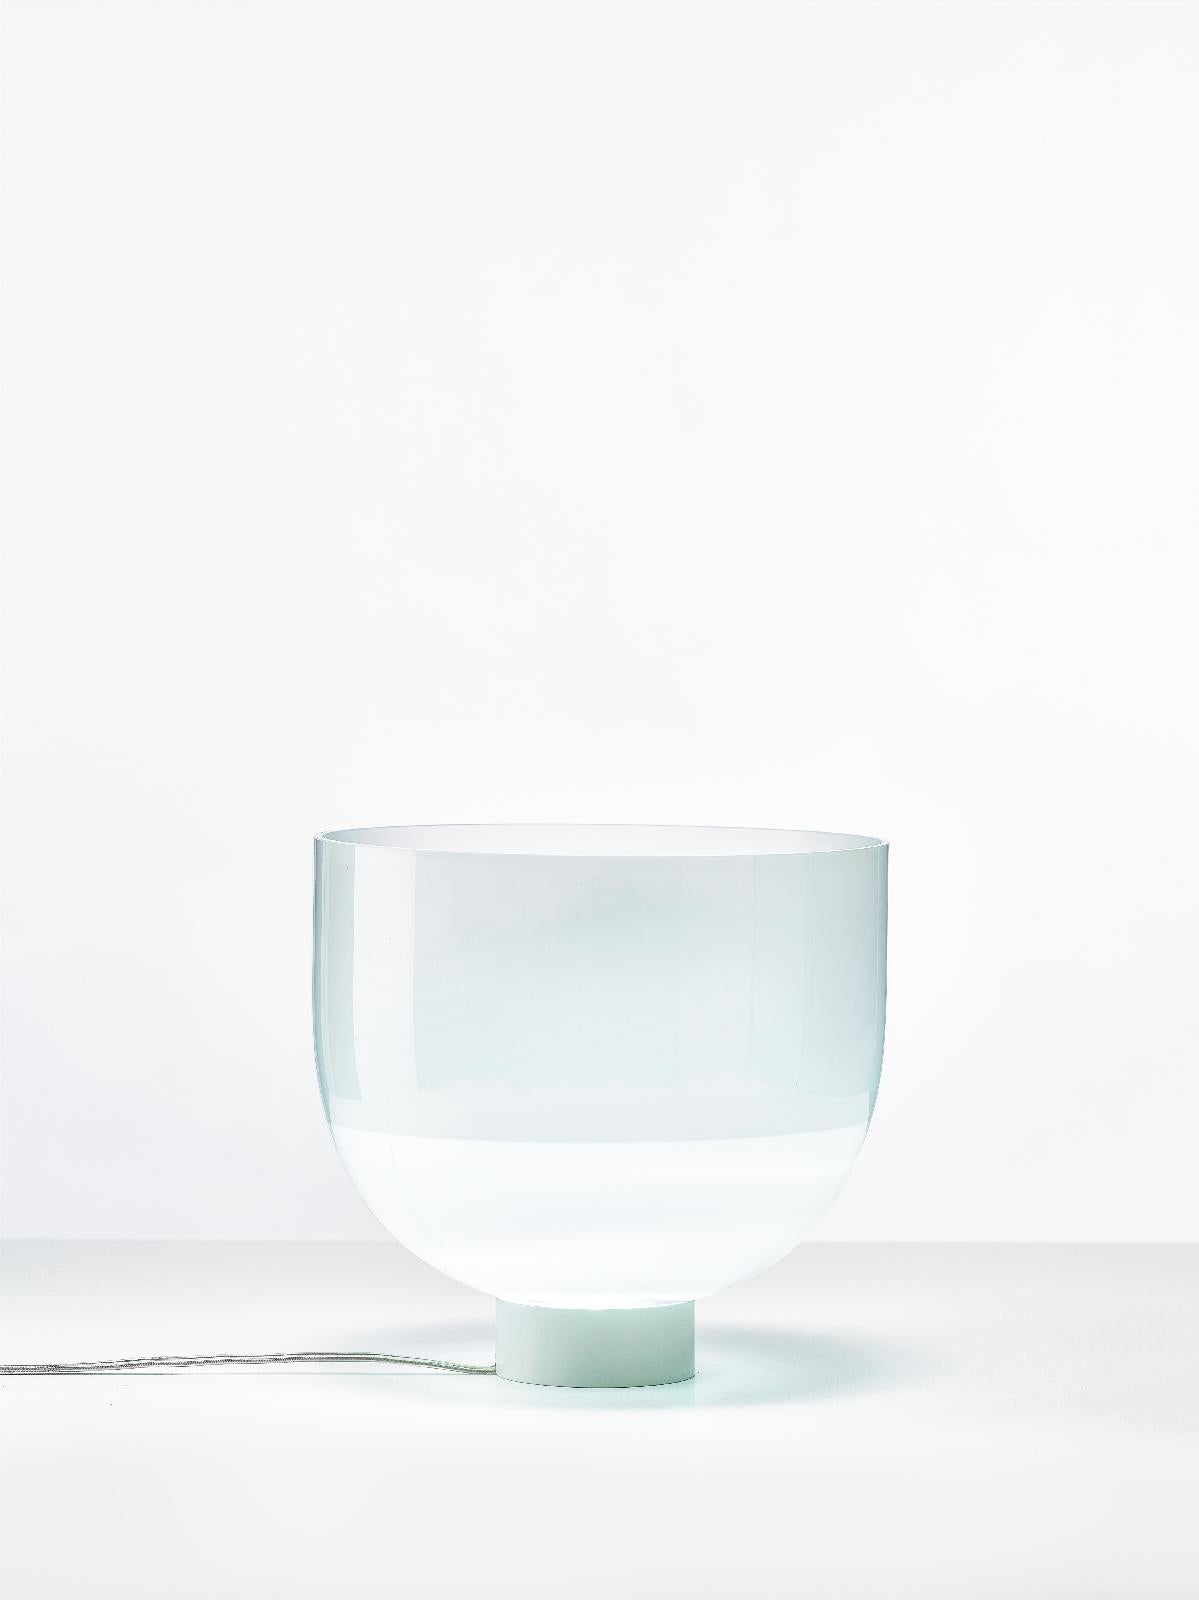 Small glowing vase table lamp by Dechem Studio.
Dimensions: D 25.5 x H 23.5 cm.
Materials: glass.
Available in 2 sizes: H 23.5, H 38.5 cm.

Something between vase and lamp, Glowing Vase is a hybrid interior object, produced in clear cloudy